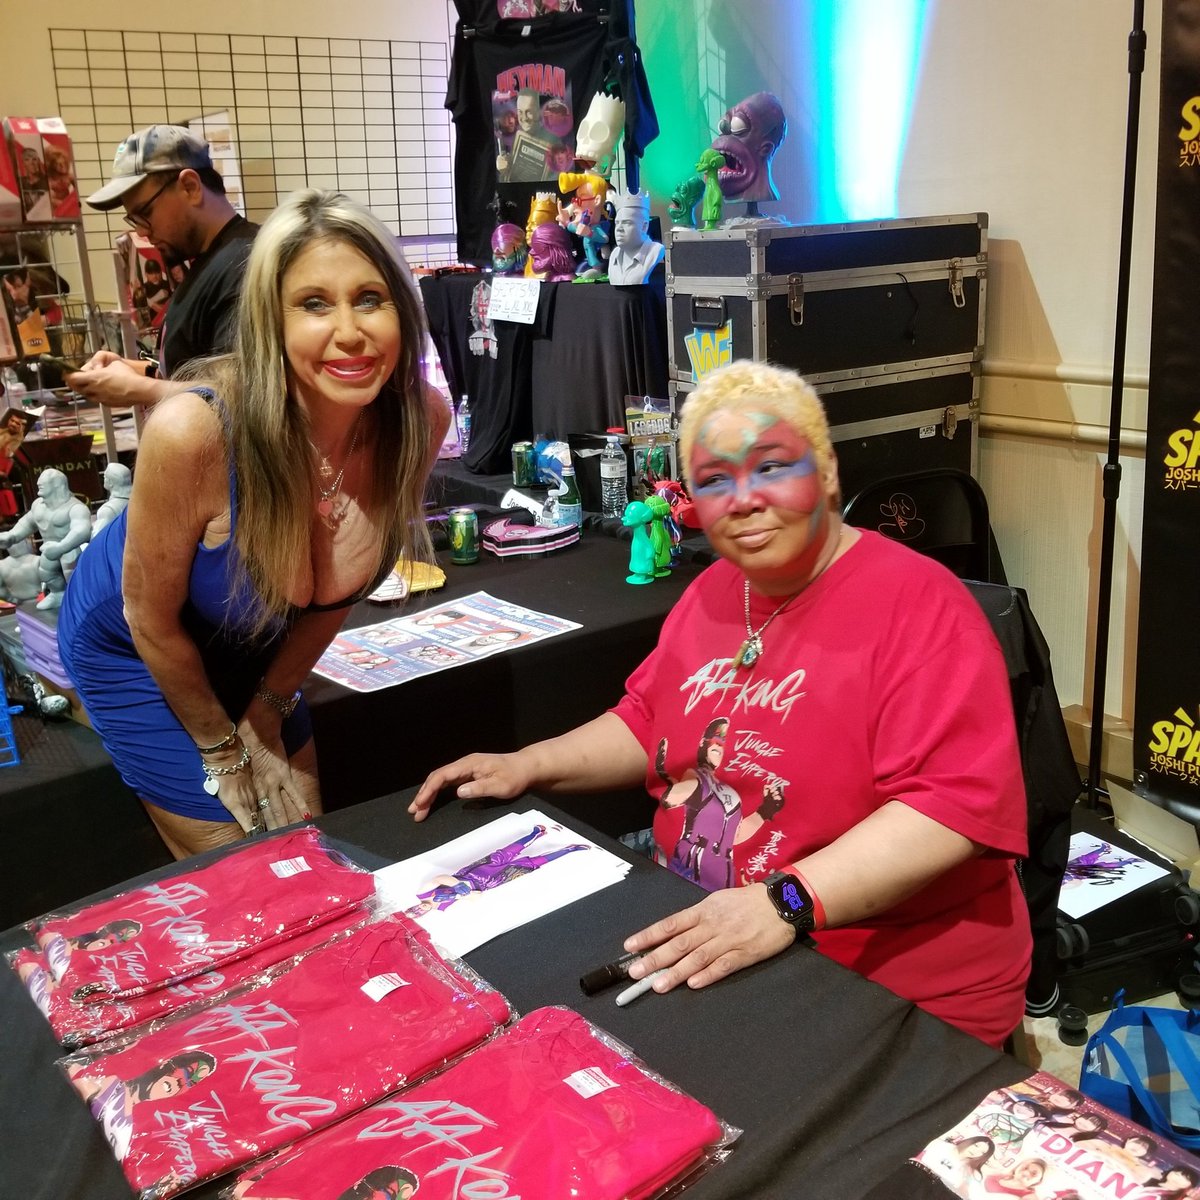 5. Inducting eddie gilbert into independent hof 6. Hanging out with @jasminstclaire , sorry touching your boobs was #6 highlight 7. Getting an autographed barb wire bat from atsushi onita 8. Meeting ajw legend aja kong